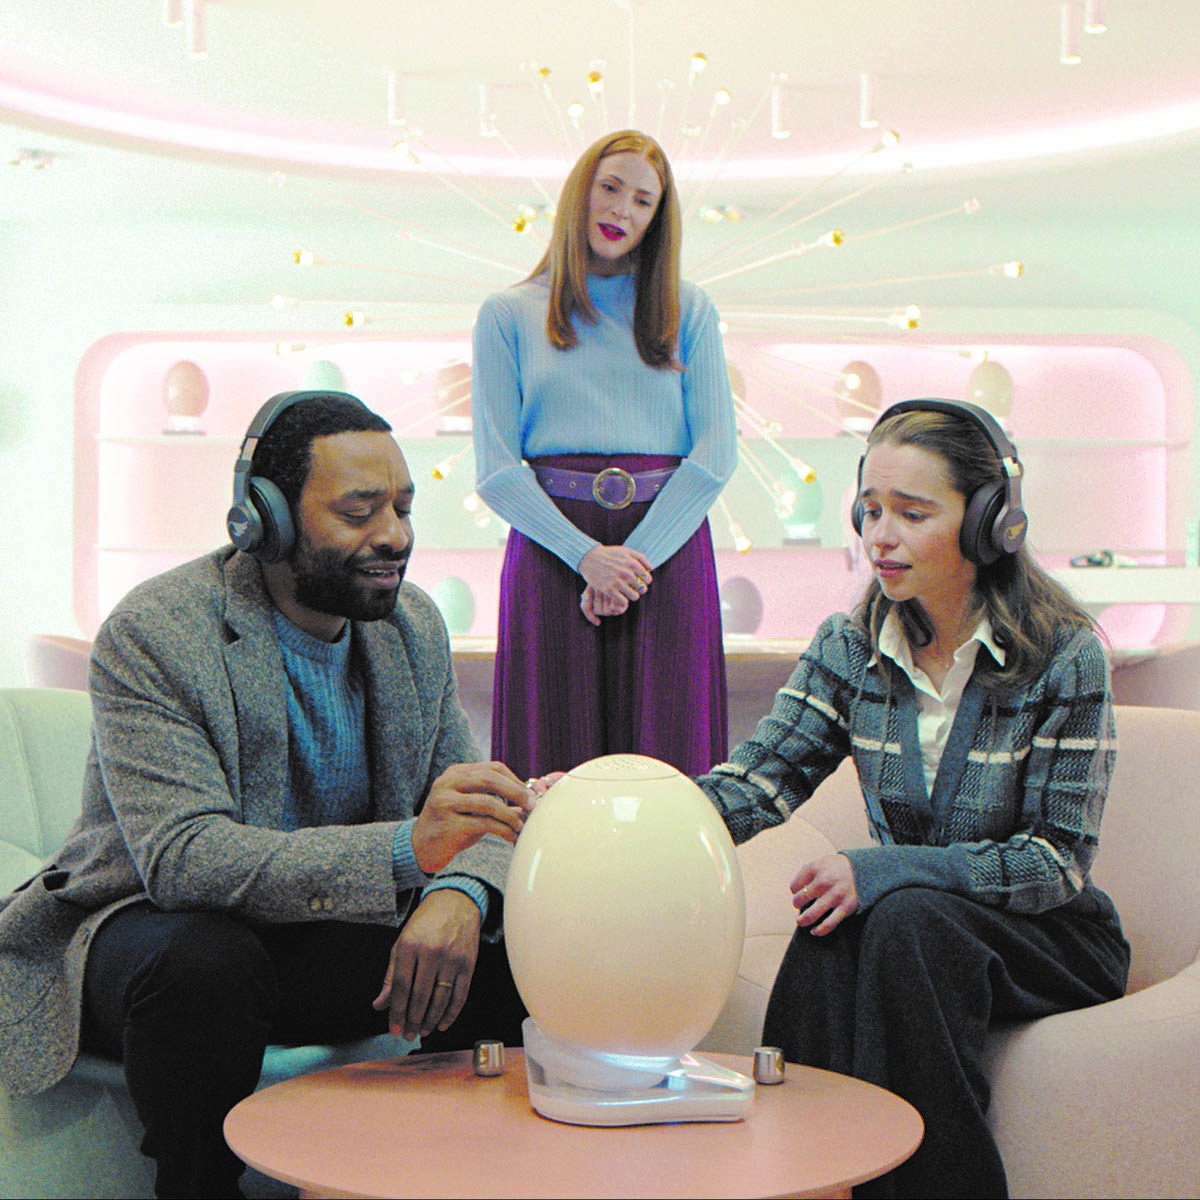 a man and a woman wearing headphones sitting next to a white pod in a futuristic room.